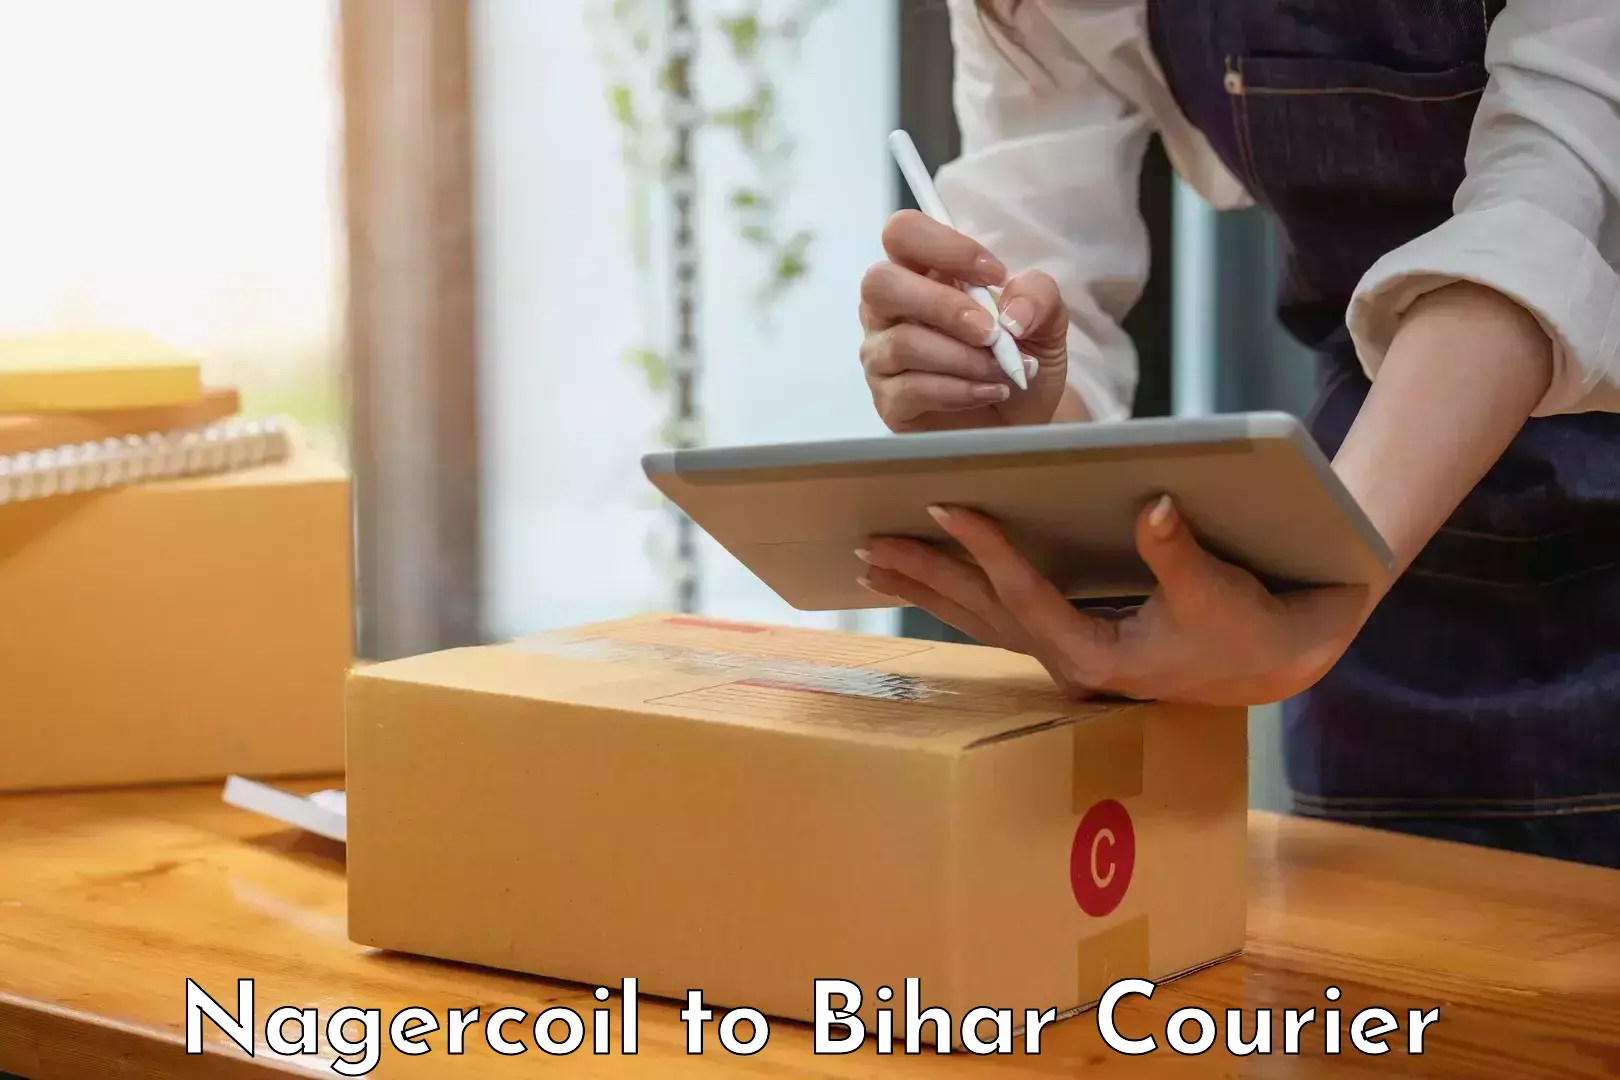 Parcel service for businesses Nagercoil to Bihar